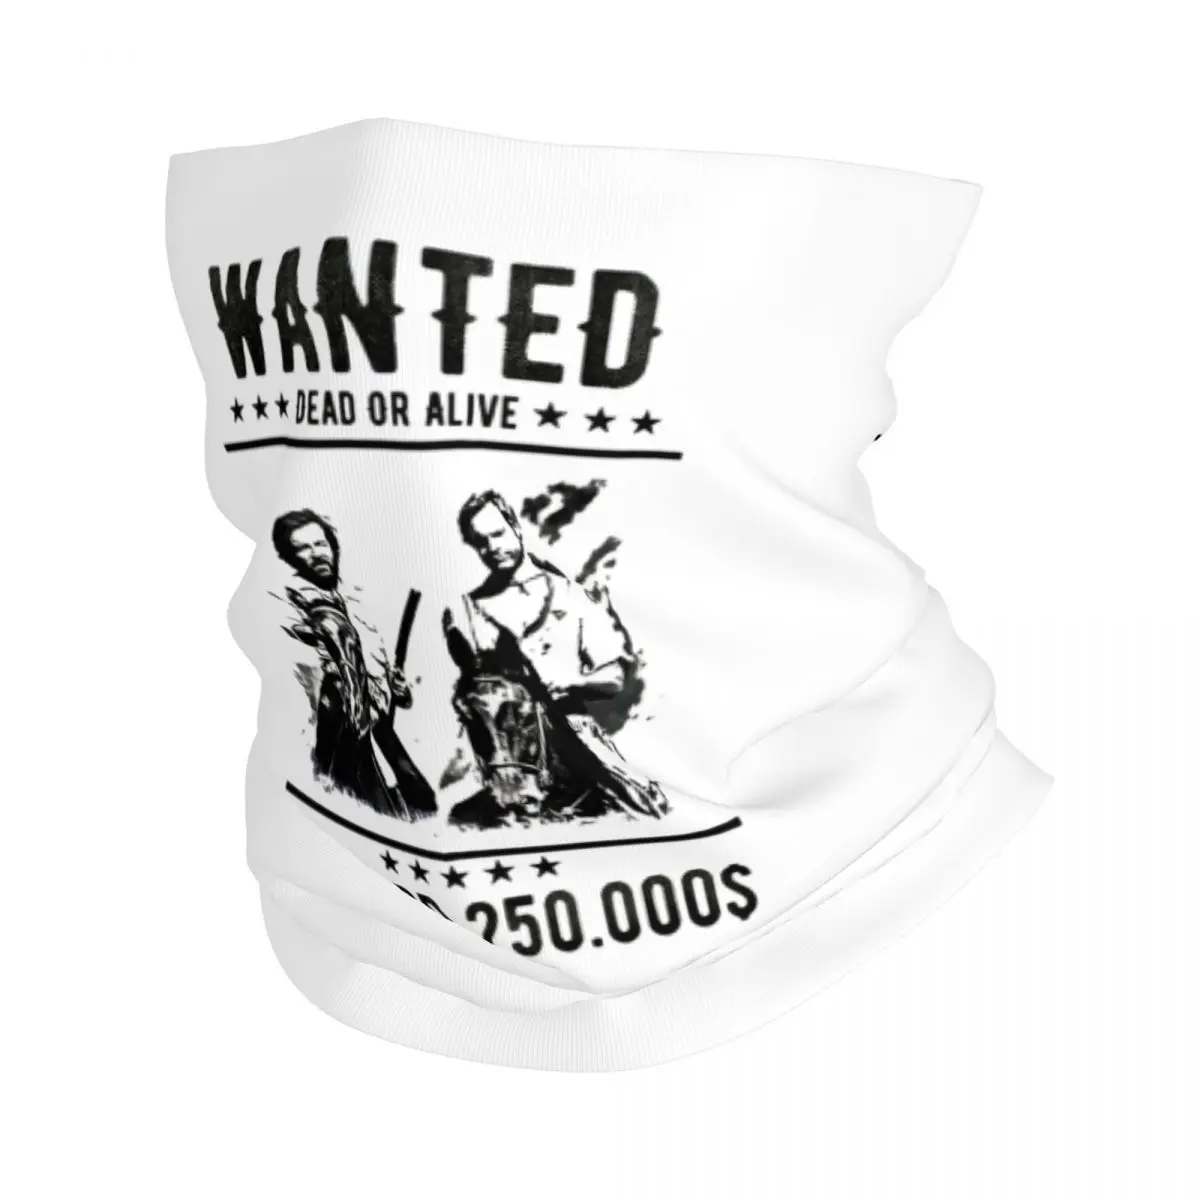 

Legends And Hero Wanted Dead Or Alive Bandana Neck Cover Printed Bud Spencer Wrap Scarf Multifunctional Balaclava Unisex Adult